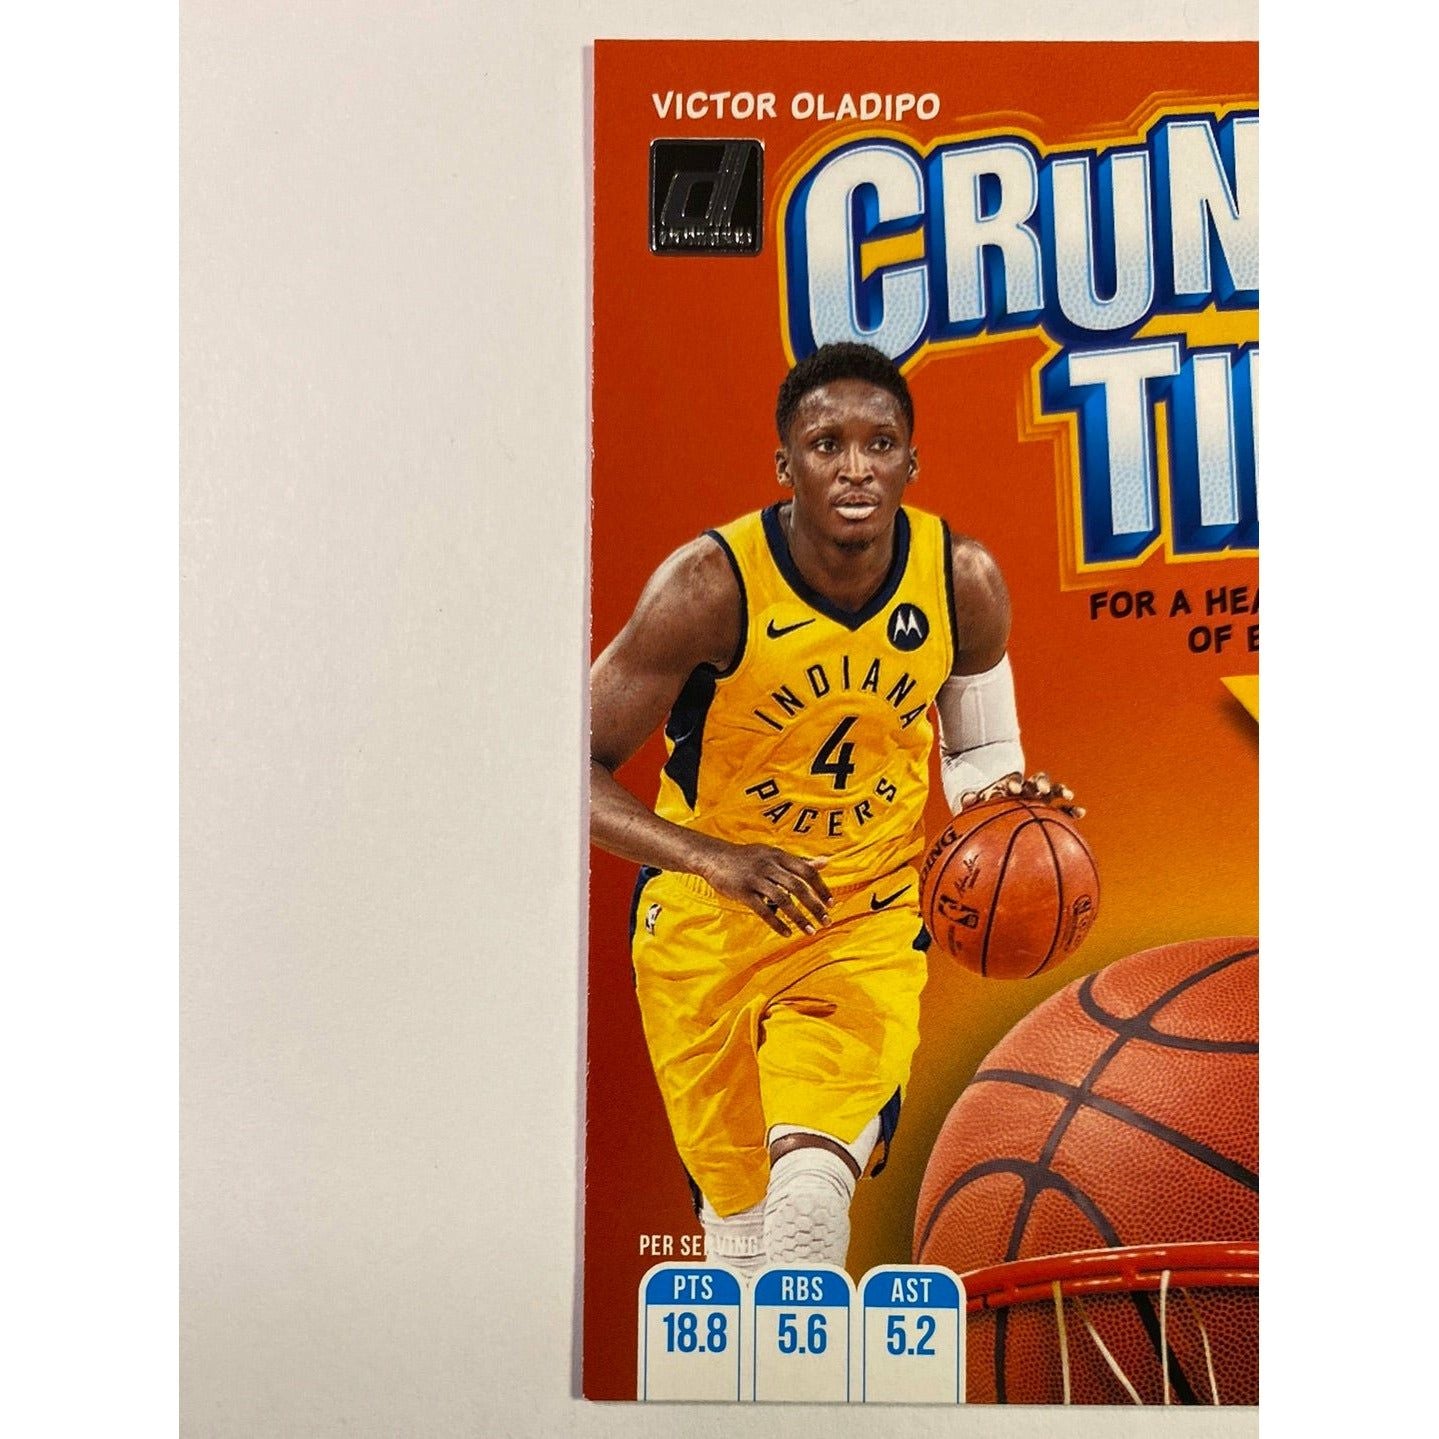  2019-20 Donruss Víctor Oladipo Crunch Time  Local Legends Cards & Collectibles